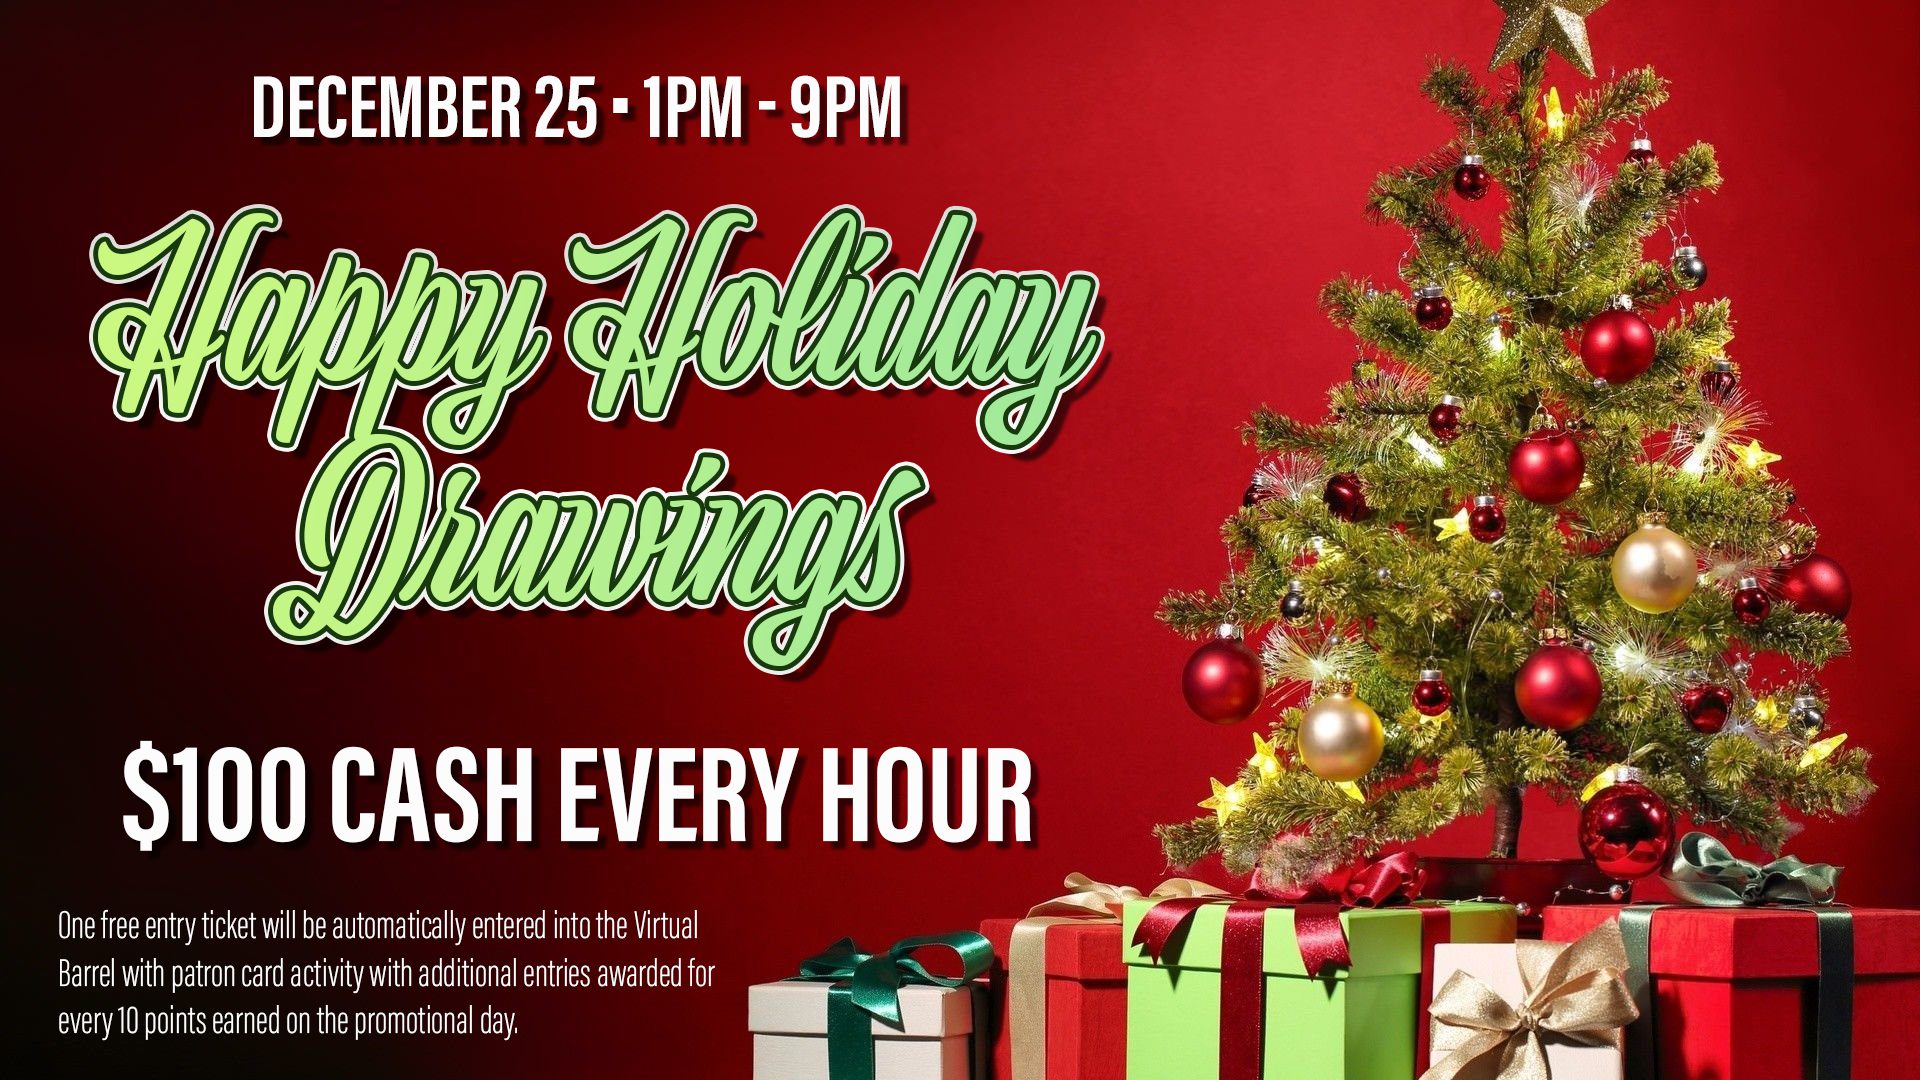 Happy holiday drawings event announcement with decorated christmas tree and gifts, offering $100 cash every hour.